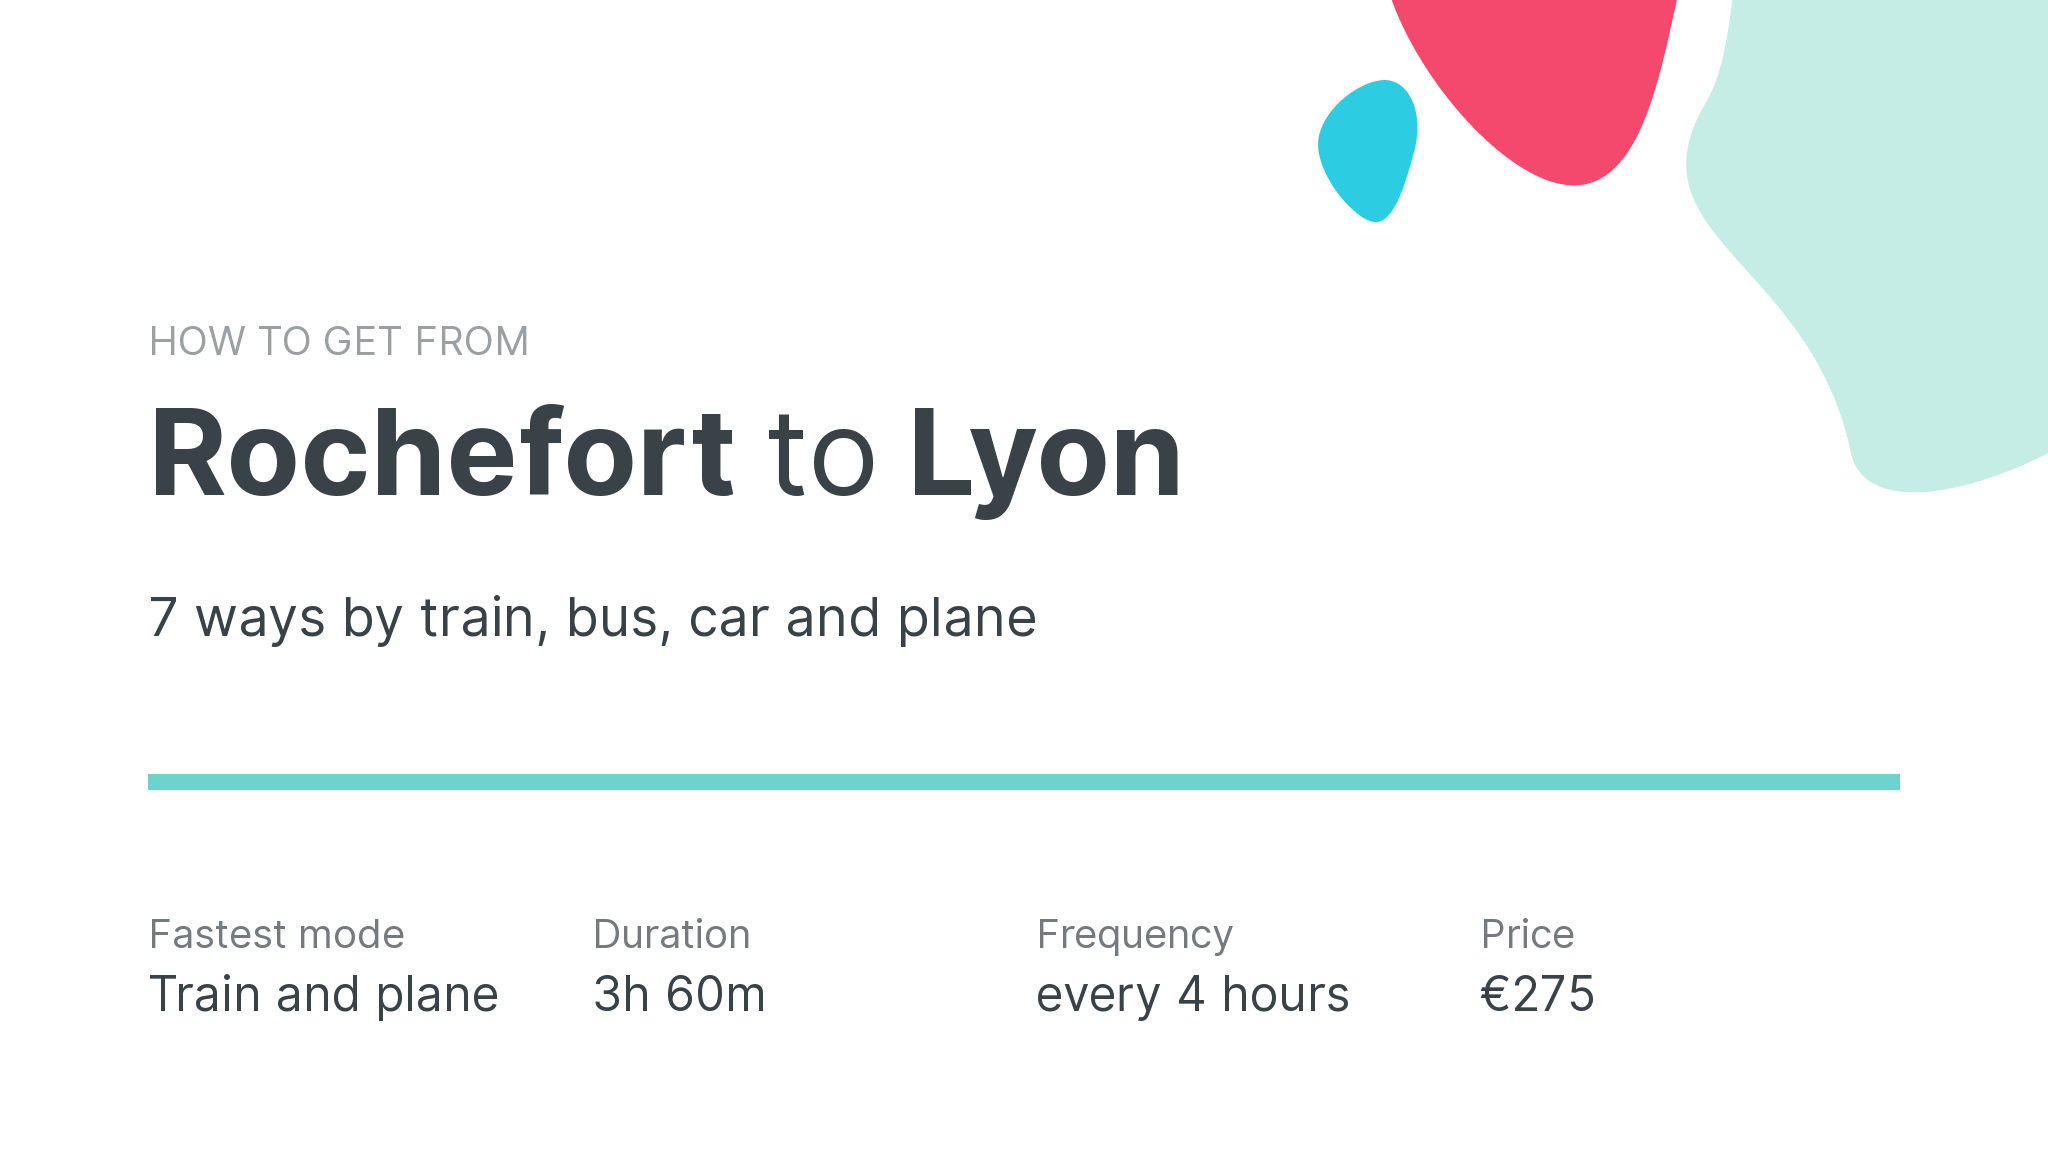 How do I get from Rochefort to Lyon